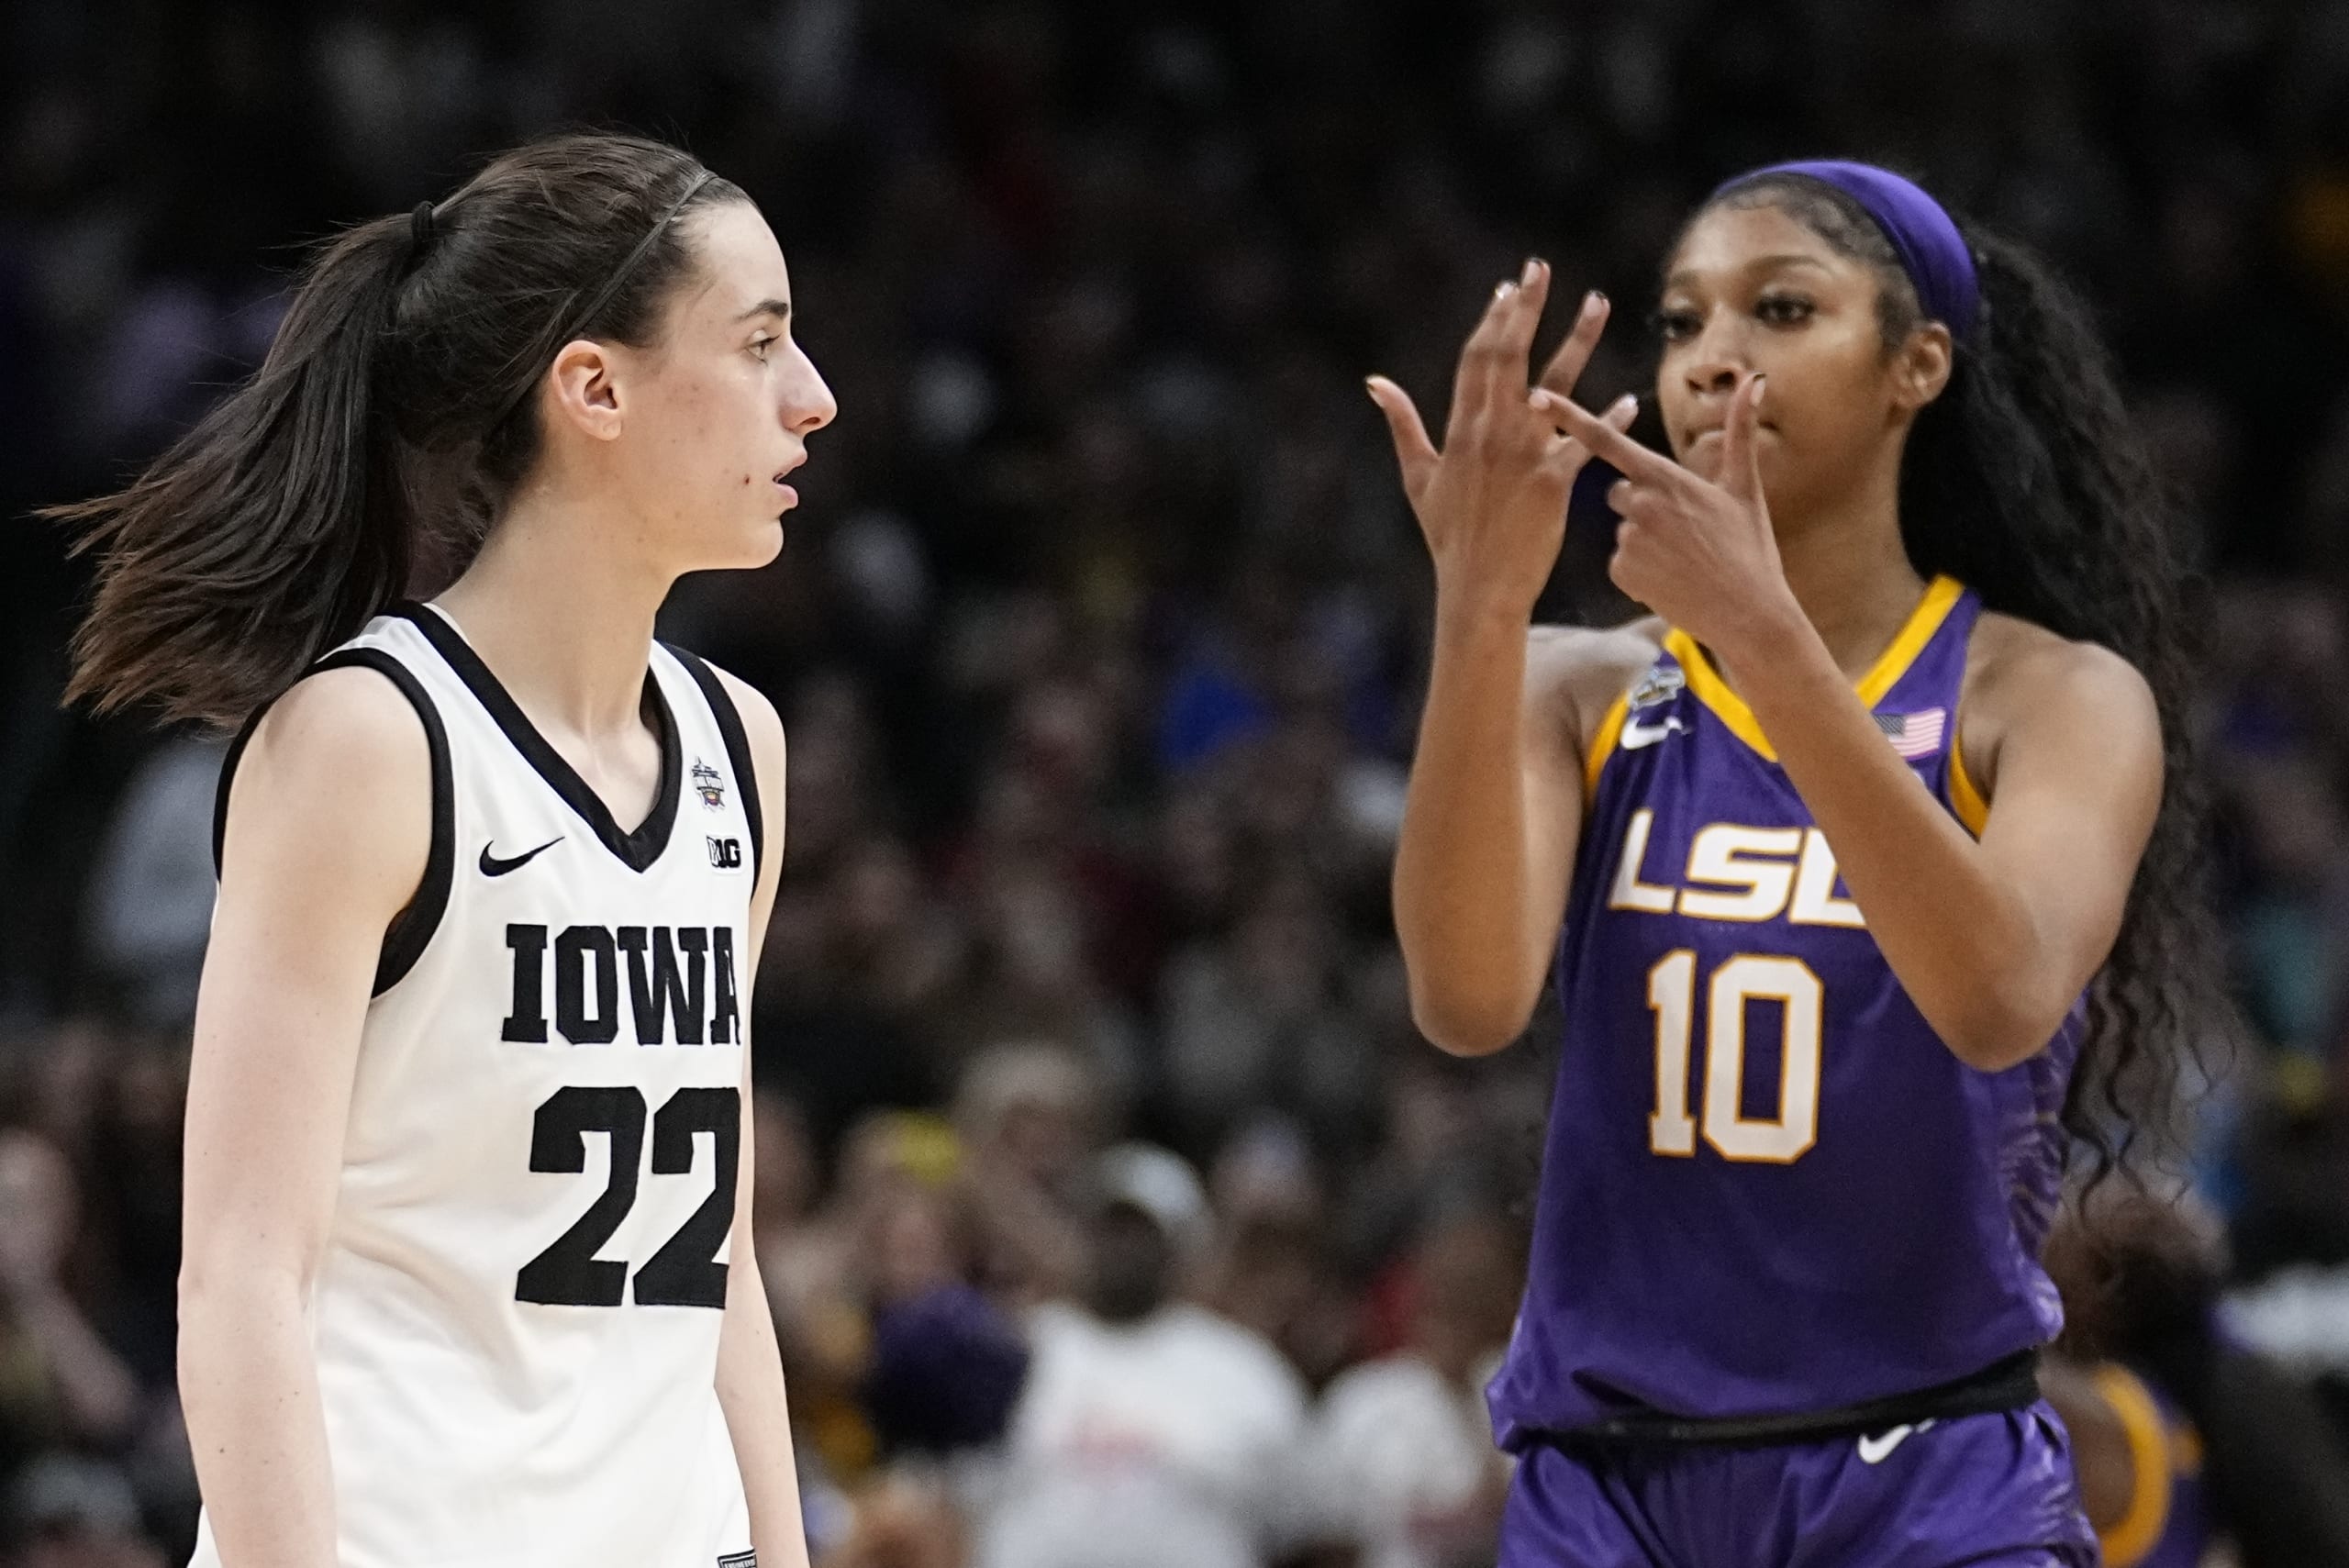 Iowa’s Clarke: Angel Reese doesn’t deserve criticism for gesture